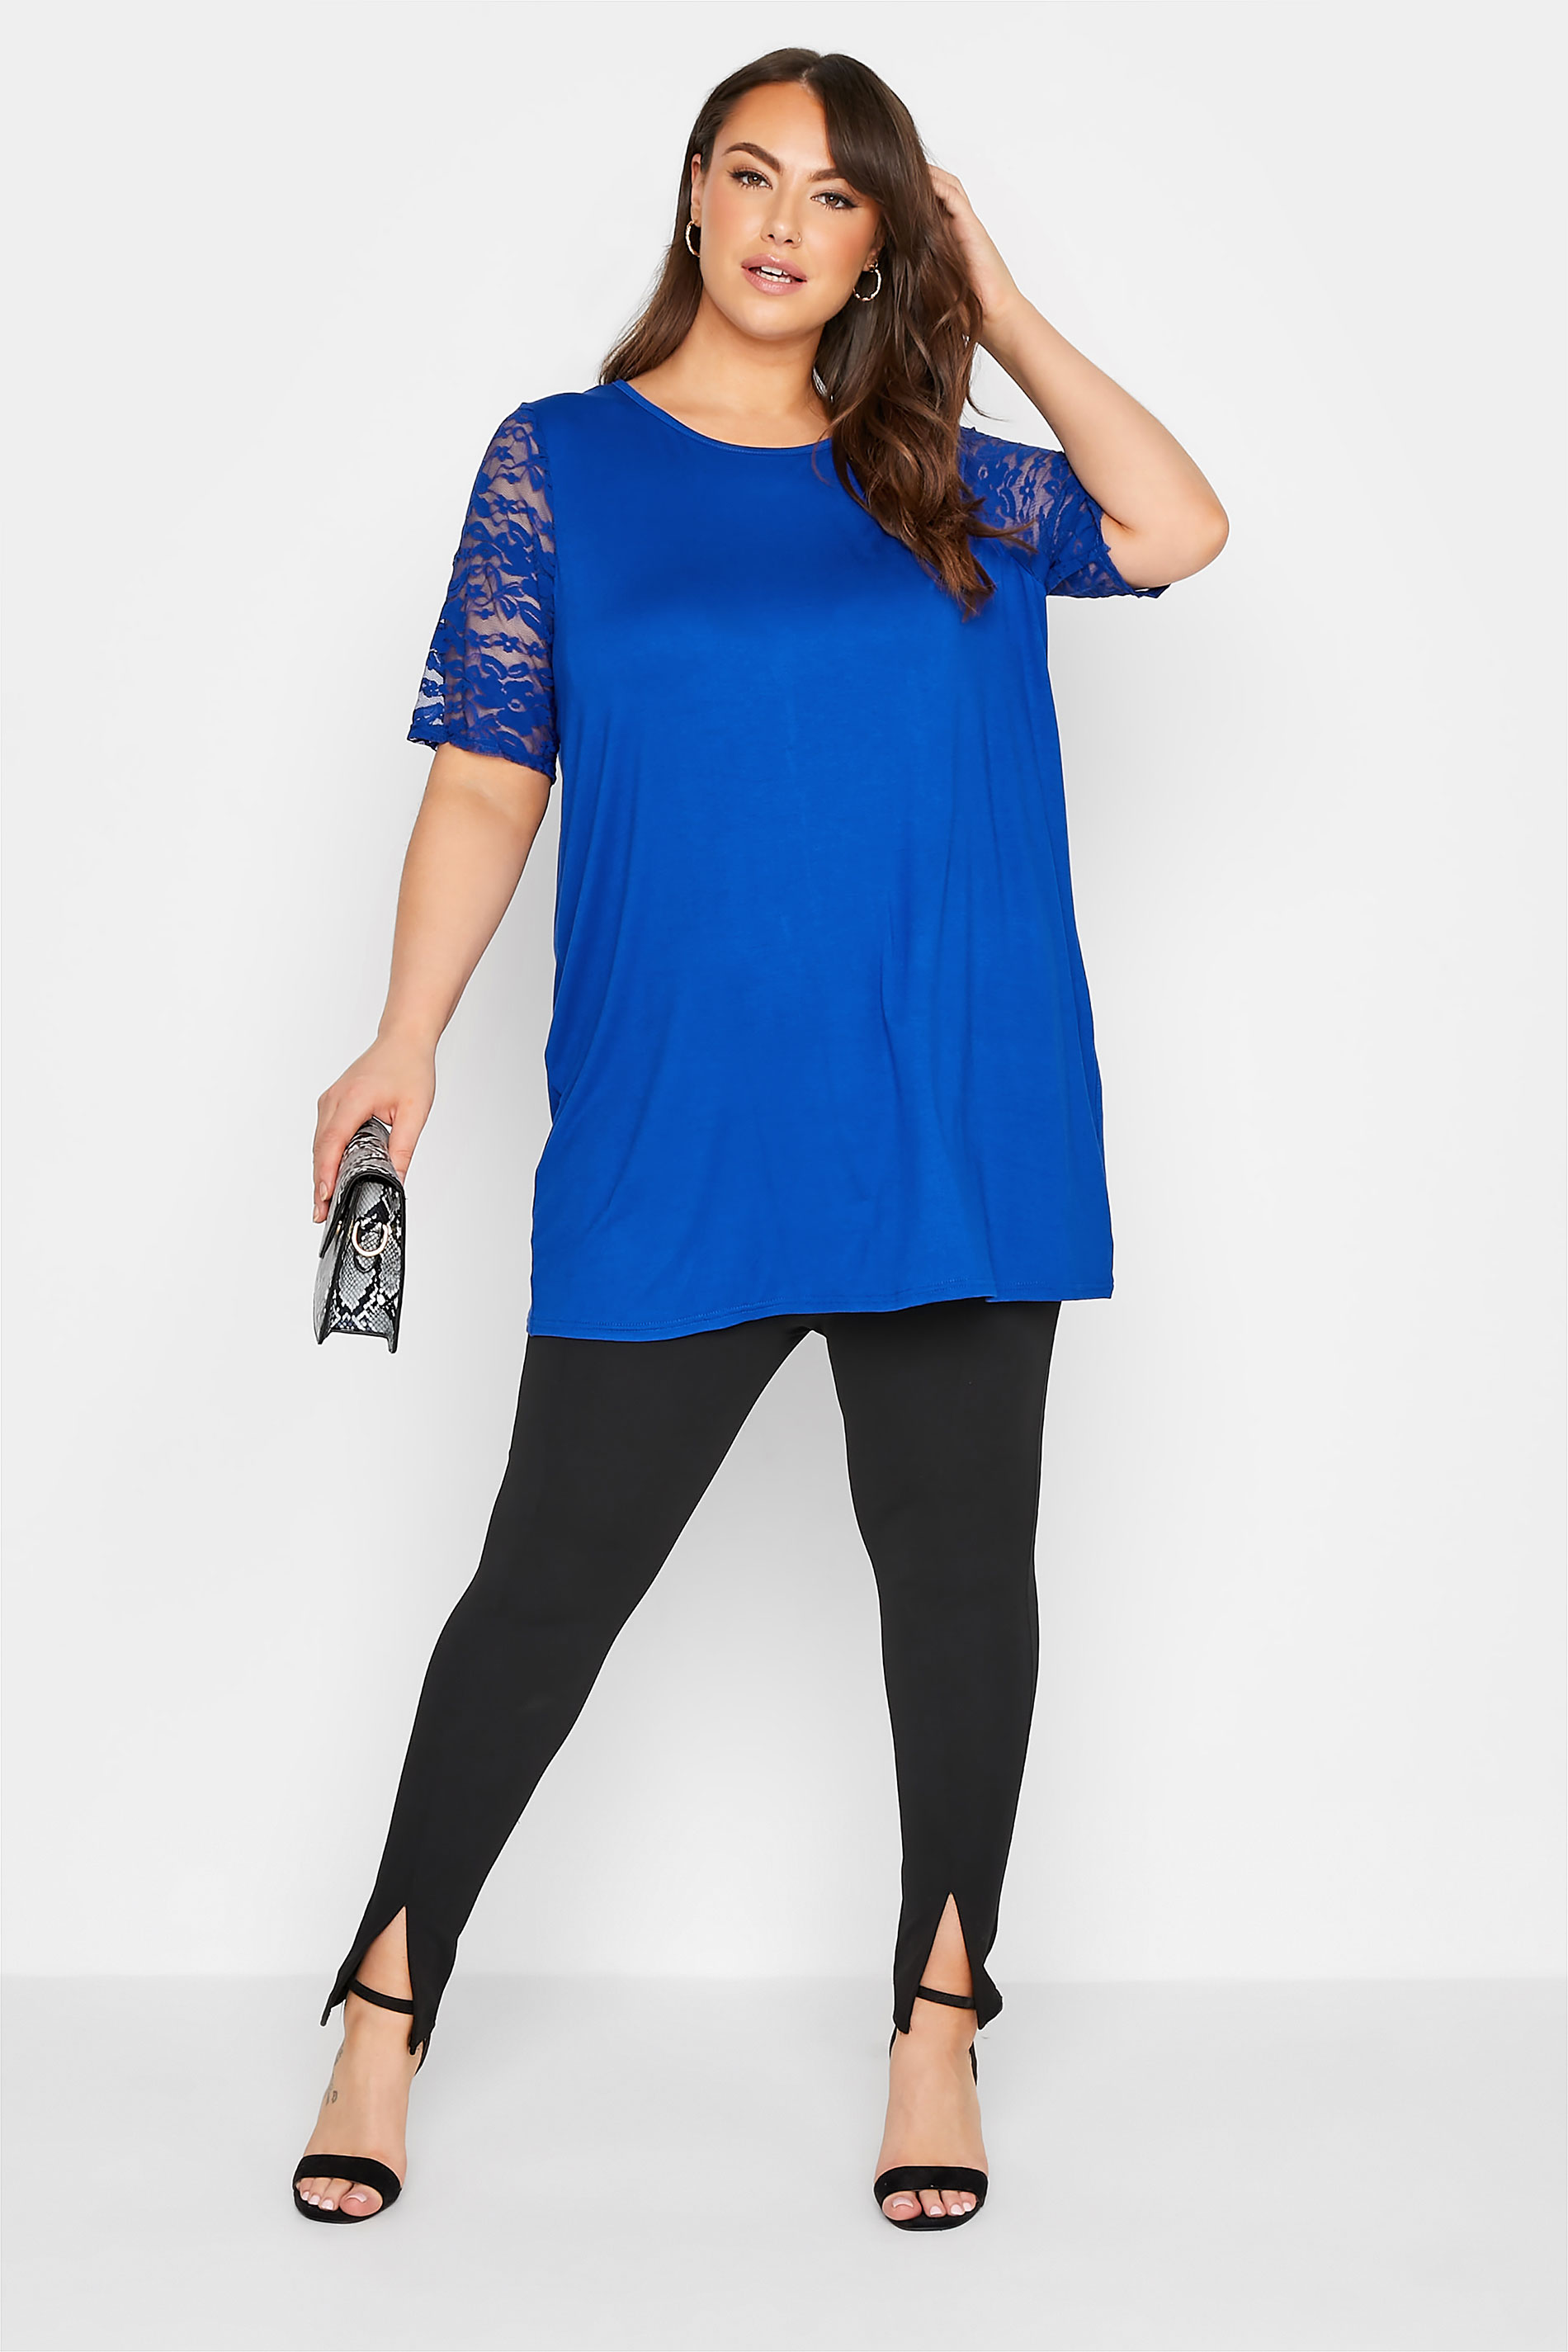 Grande taille  Tops Grande taille  Tops dentelle | LIMITED COLLECTION - Top Bleu Roi Manches Courtes Dentelle - YQ00430